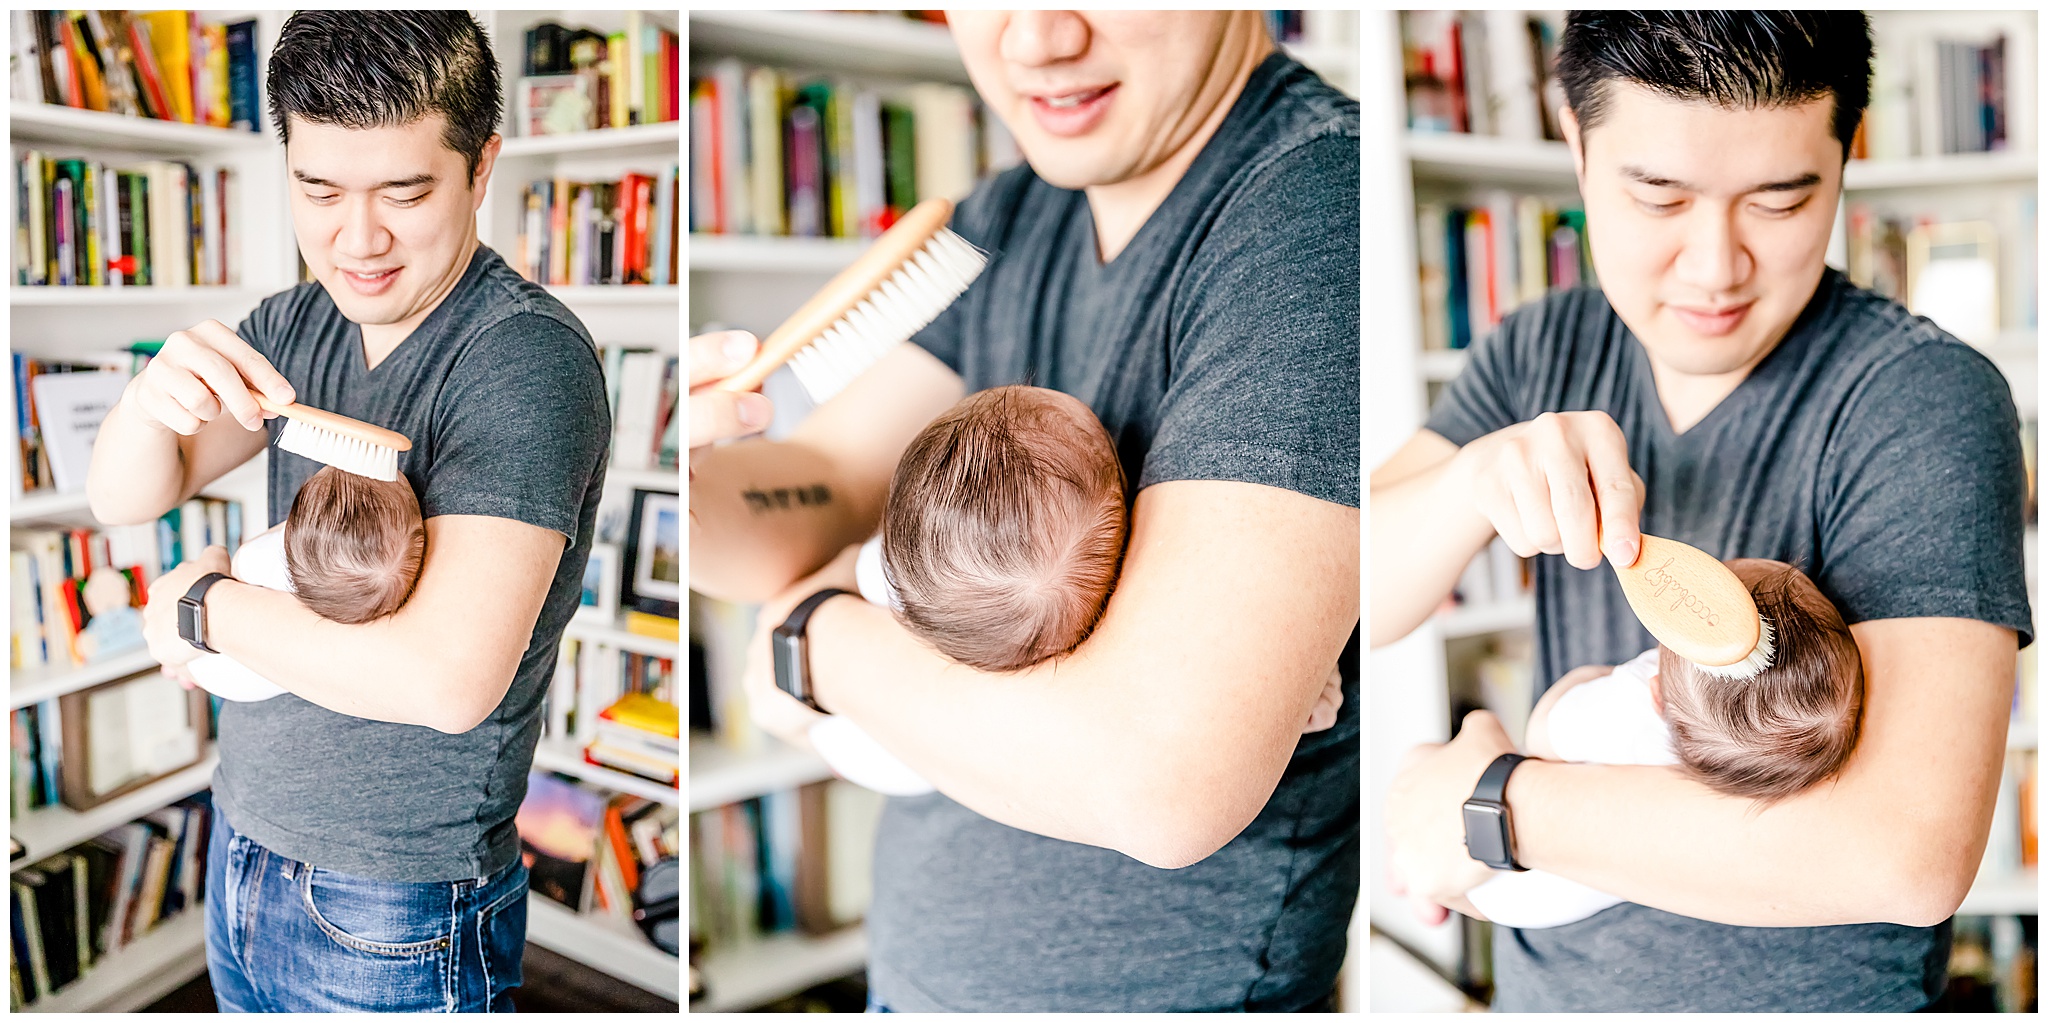 Dad and Son Newborn Photo Session by Photographers Bethany and John Kofmehl